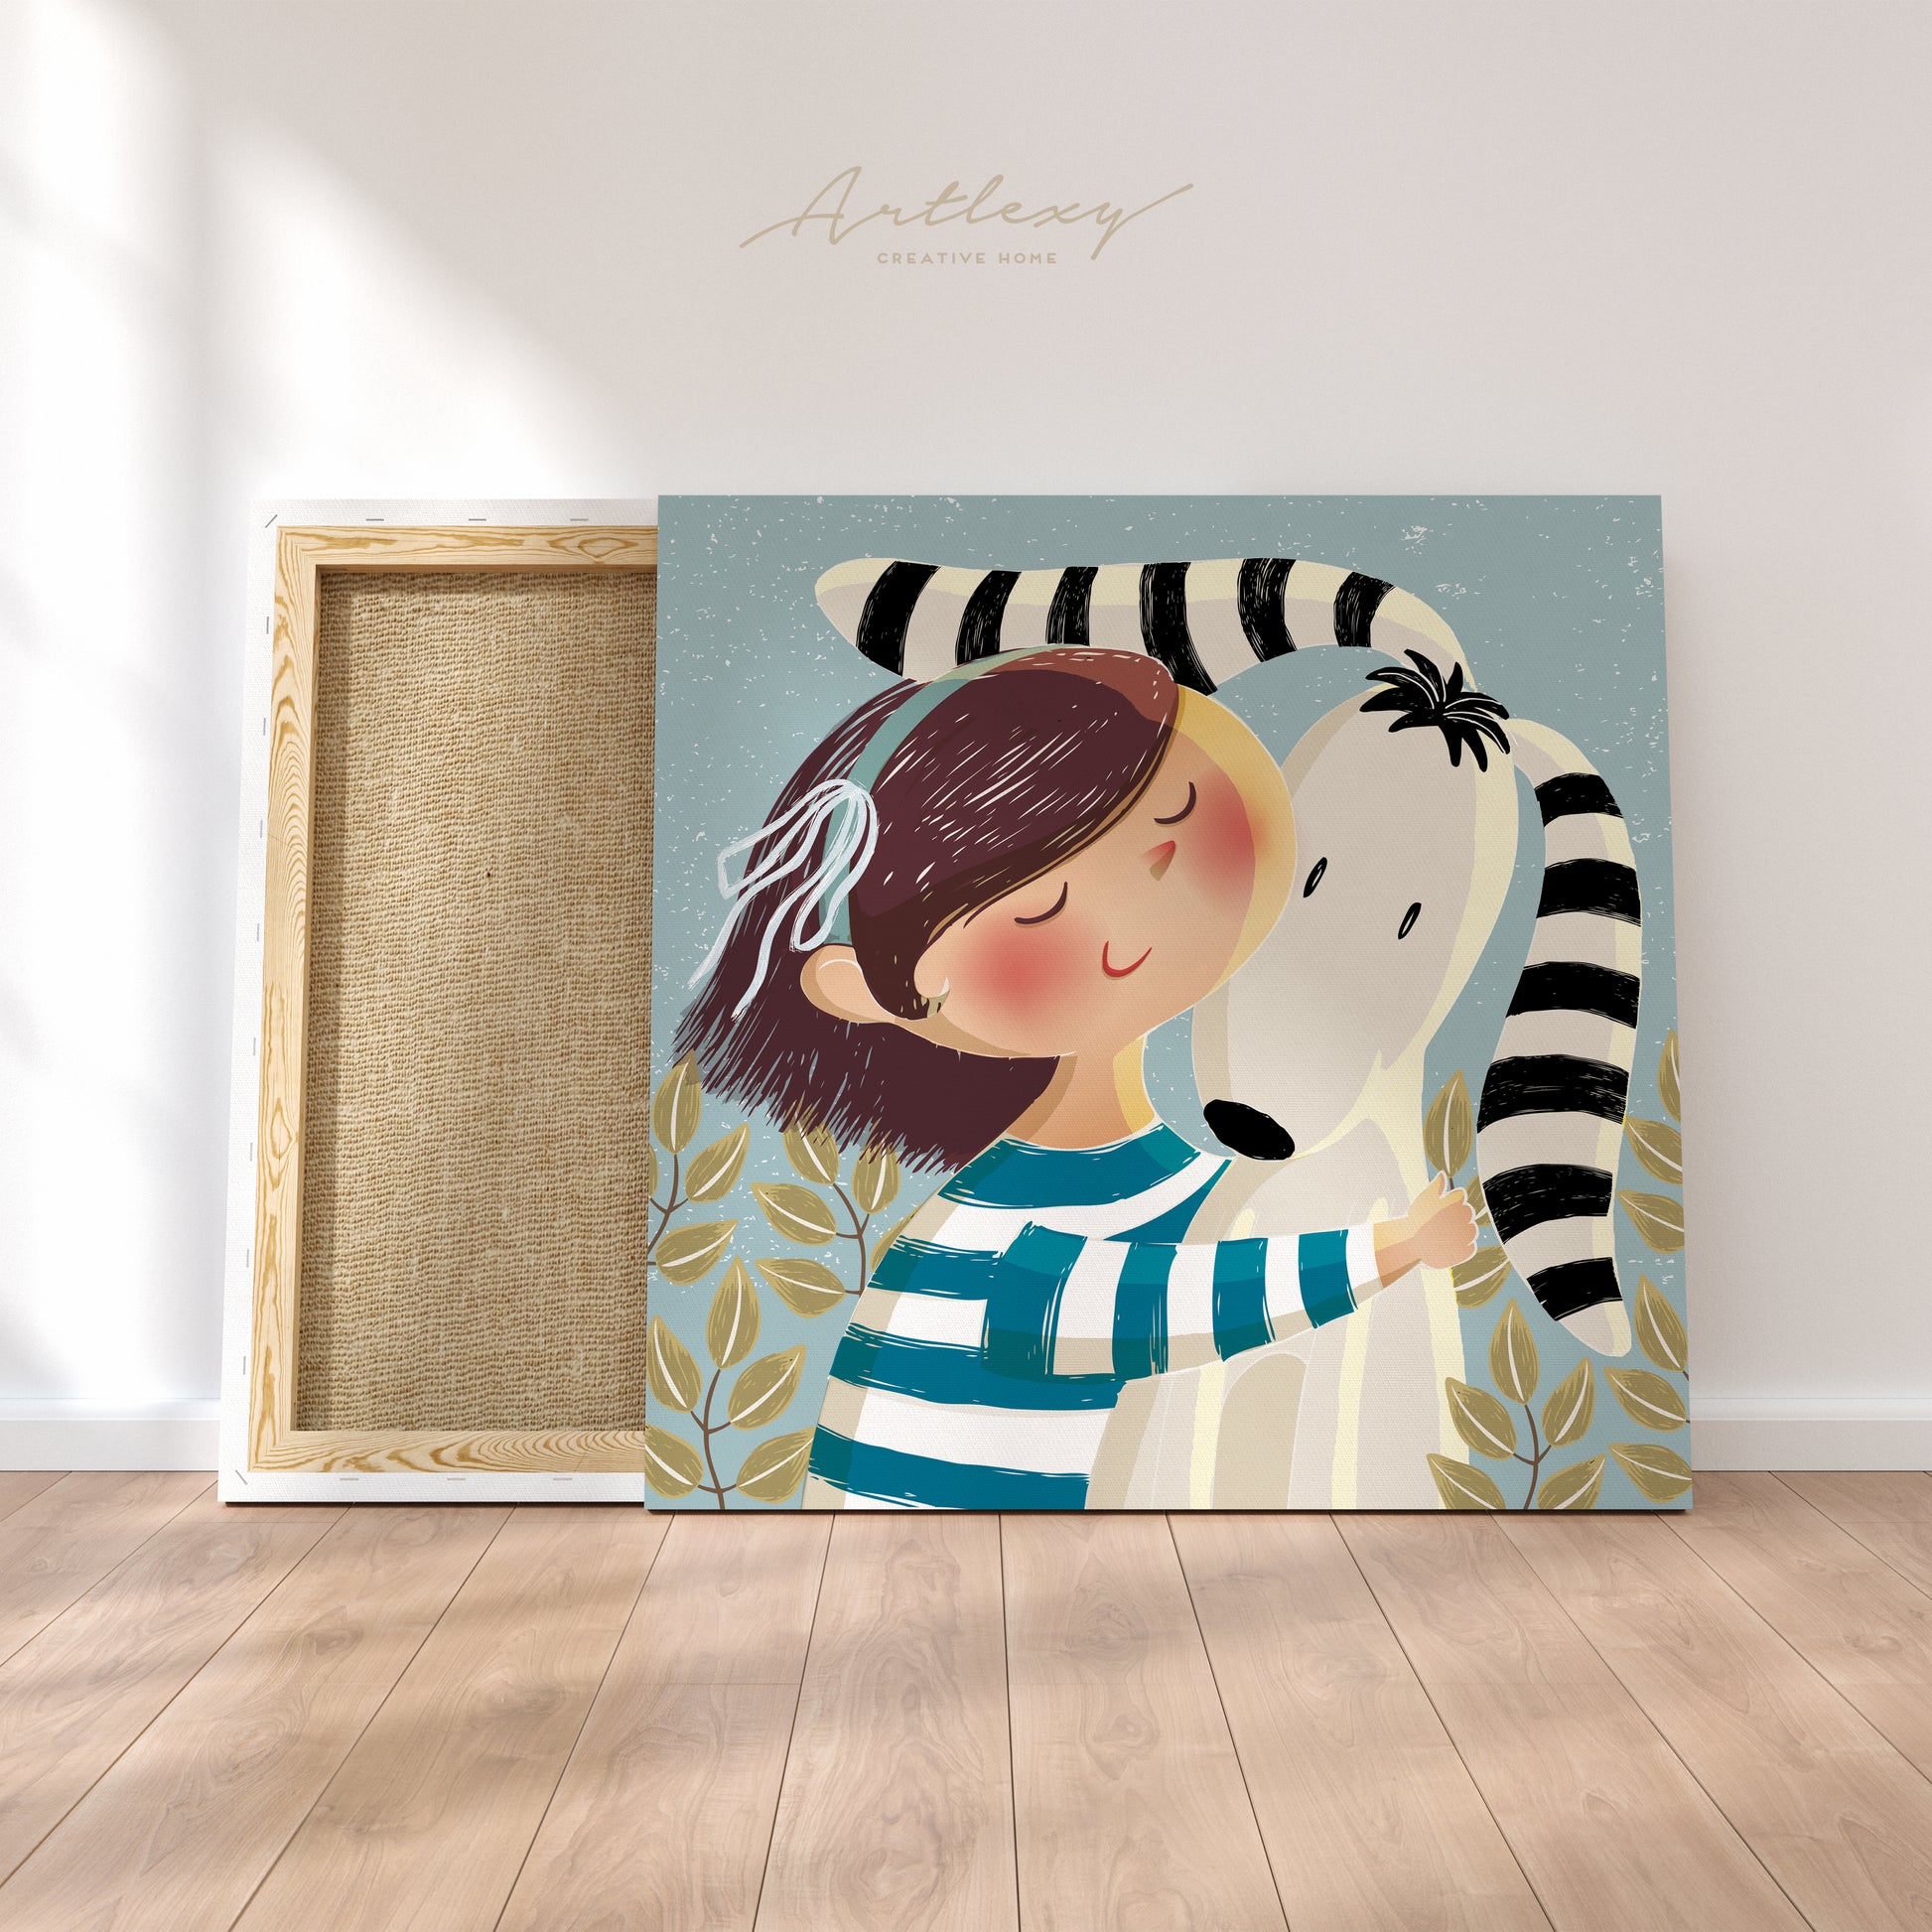 Cute Girl with Dog Canvas Print ArtLexy 1 Panel 12"x12" inches 